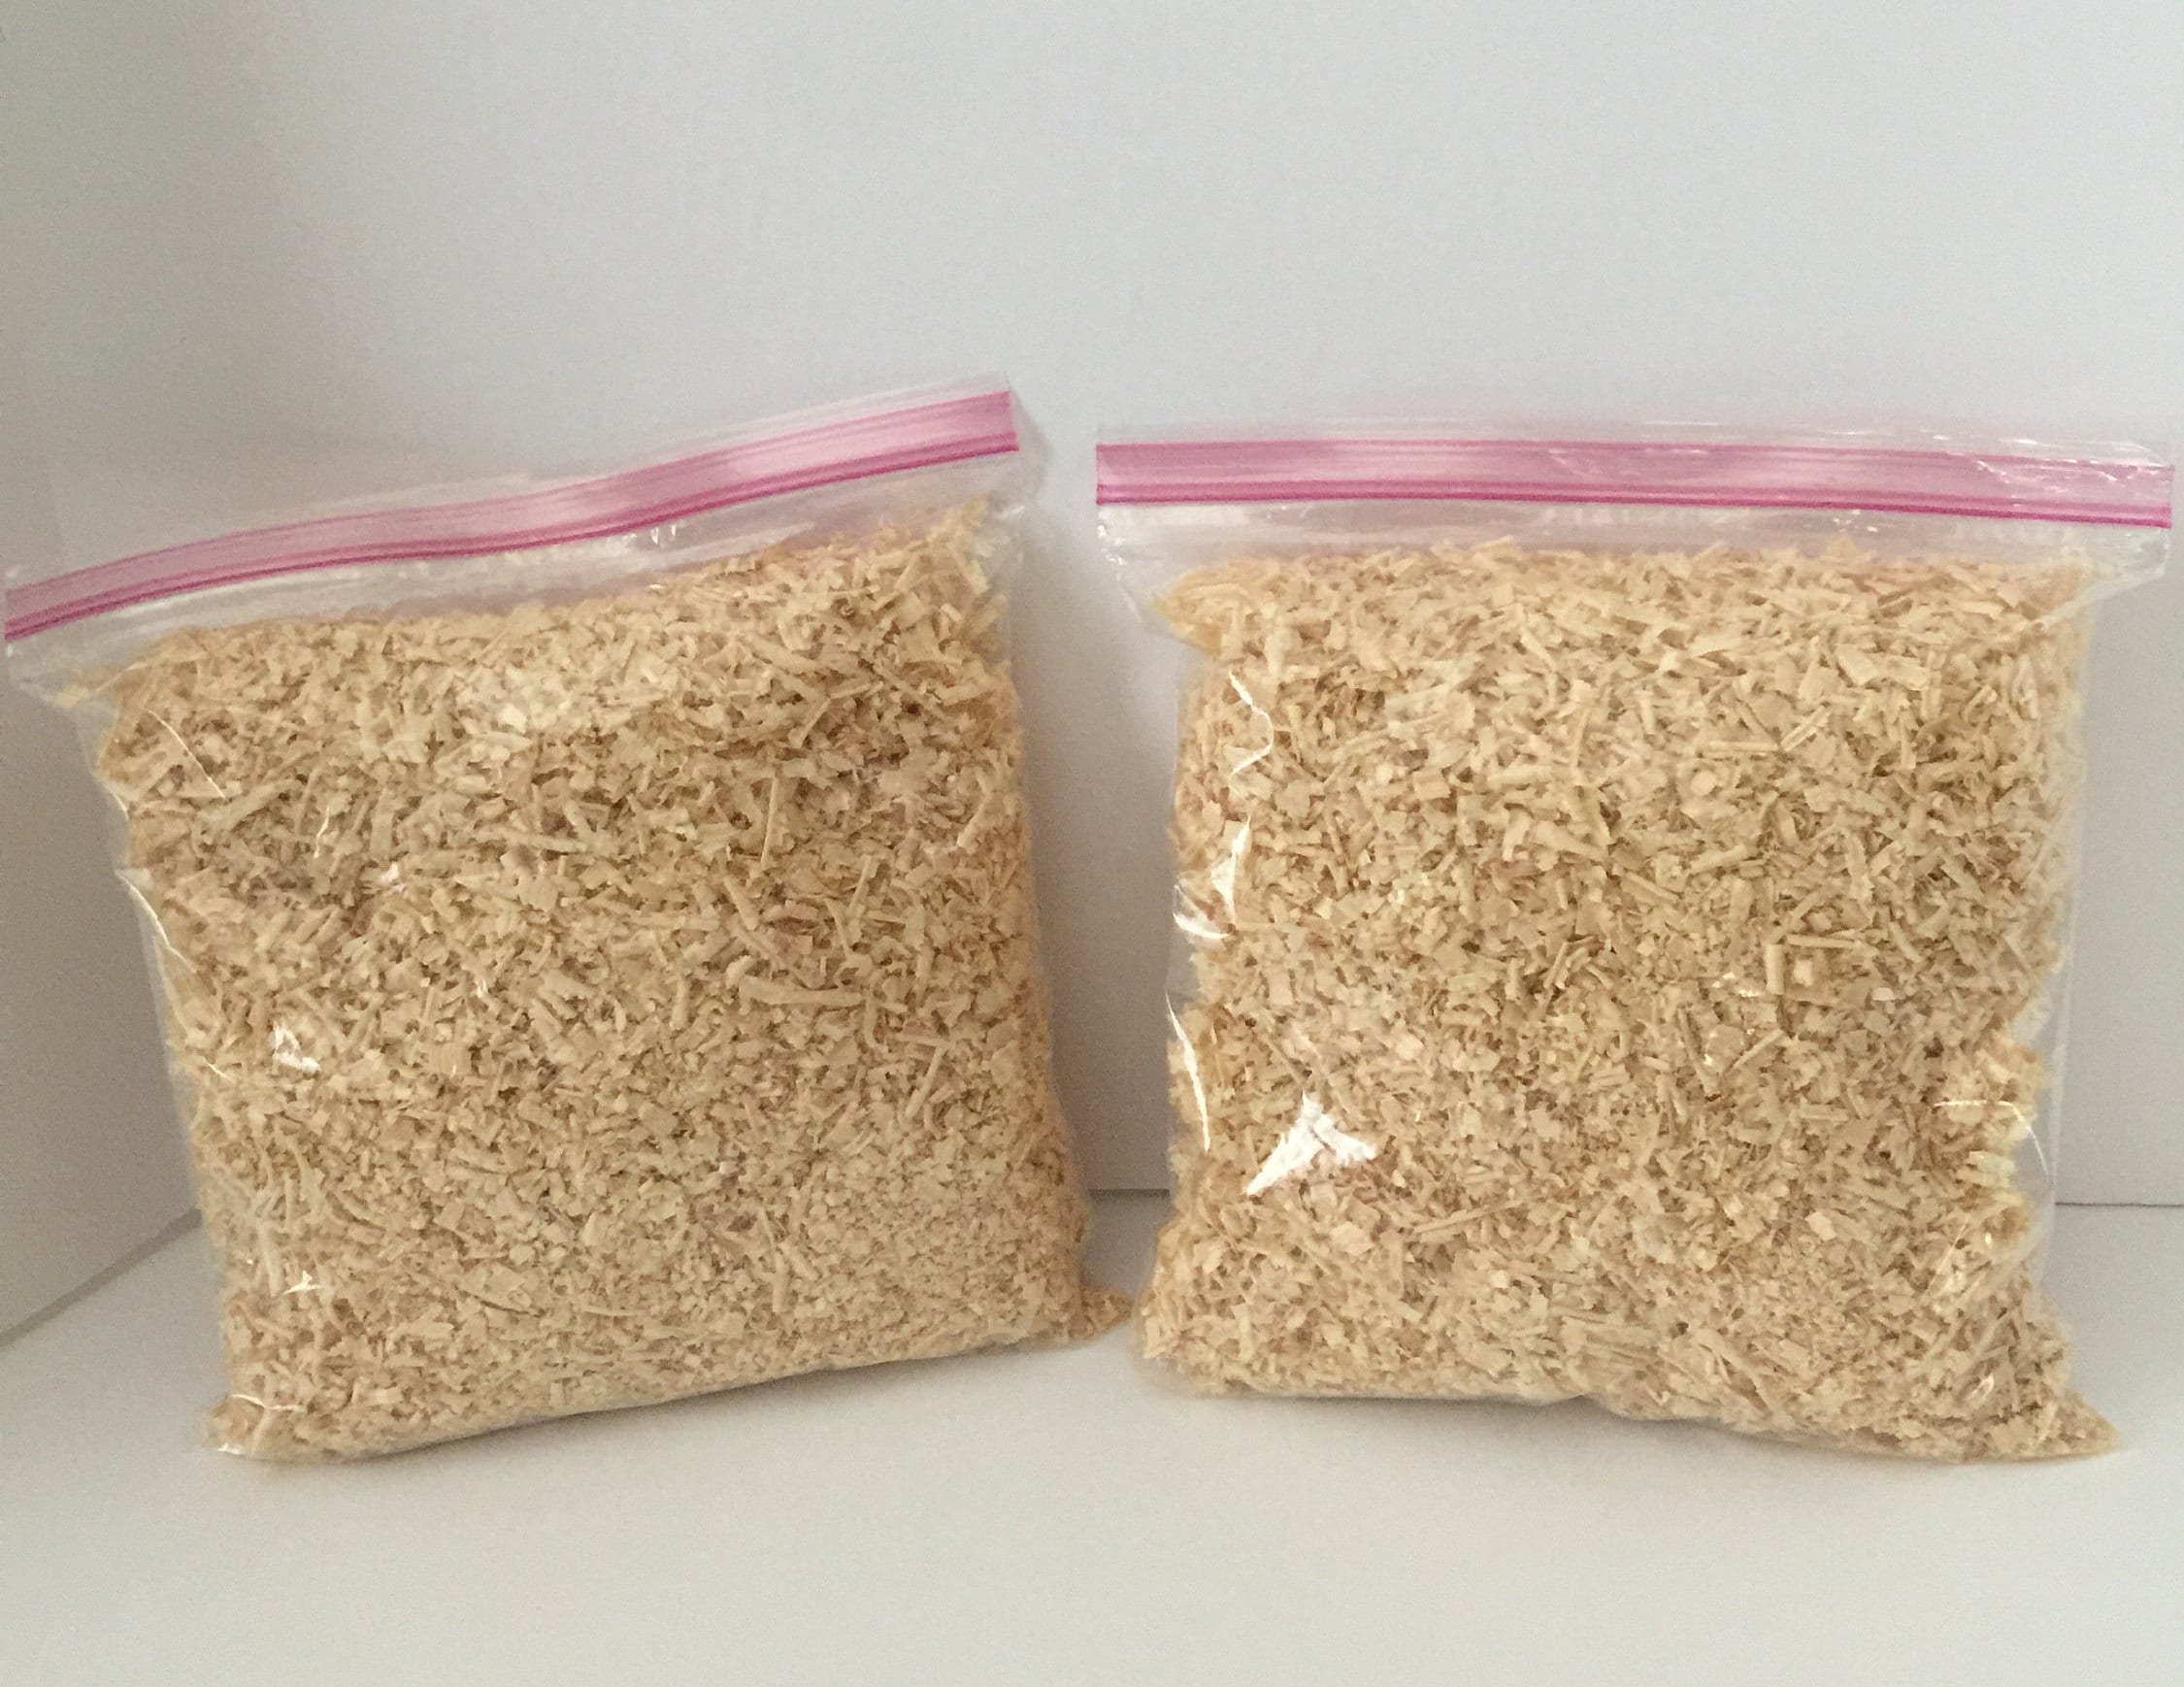 Clean Dried 2 Gallon Size Ziplock Bags of Sawdust 